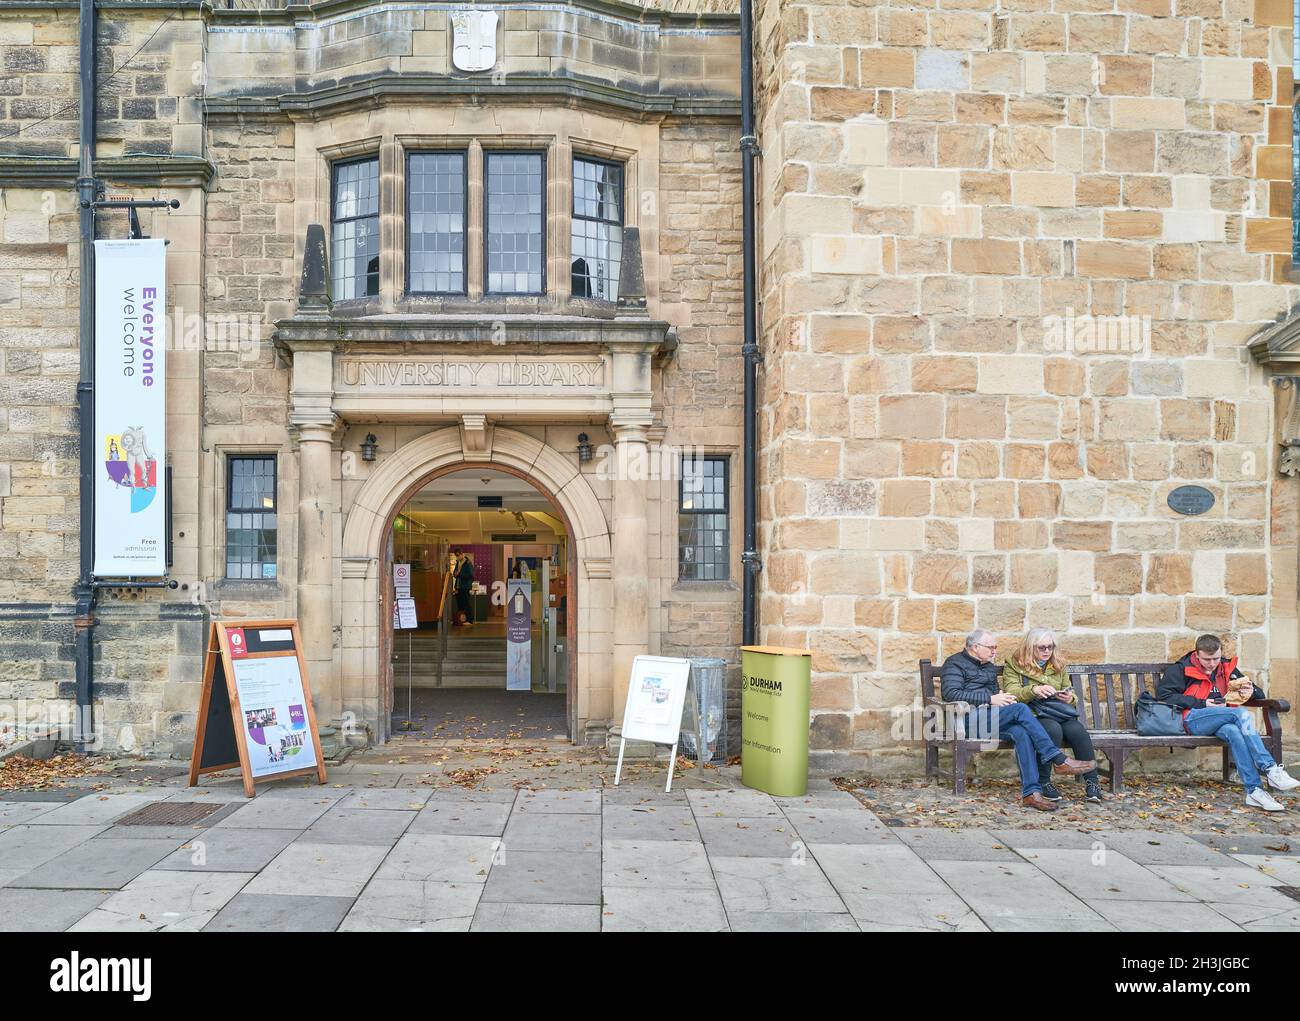 Entrance to the Palace Green library at Durham unversity, England. Stock Photo